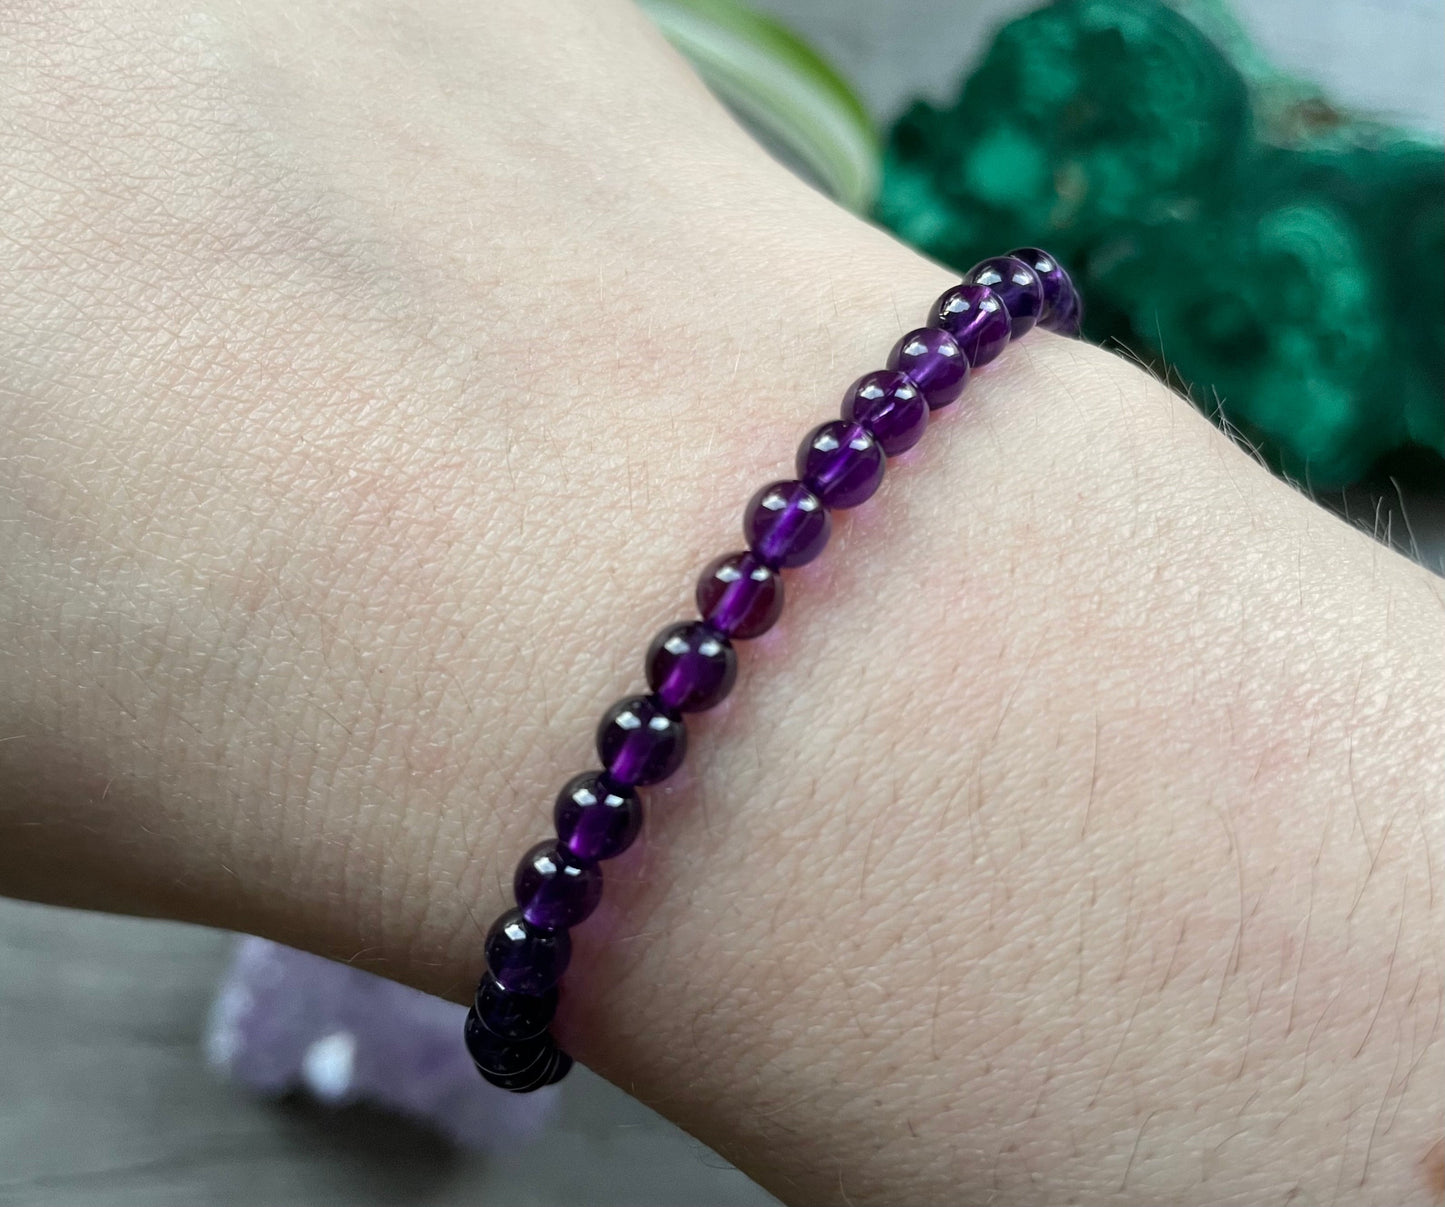 Pictured is an amethyst bead bracelet.